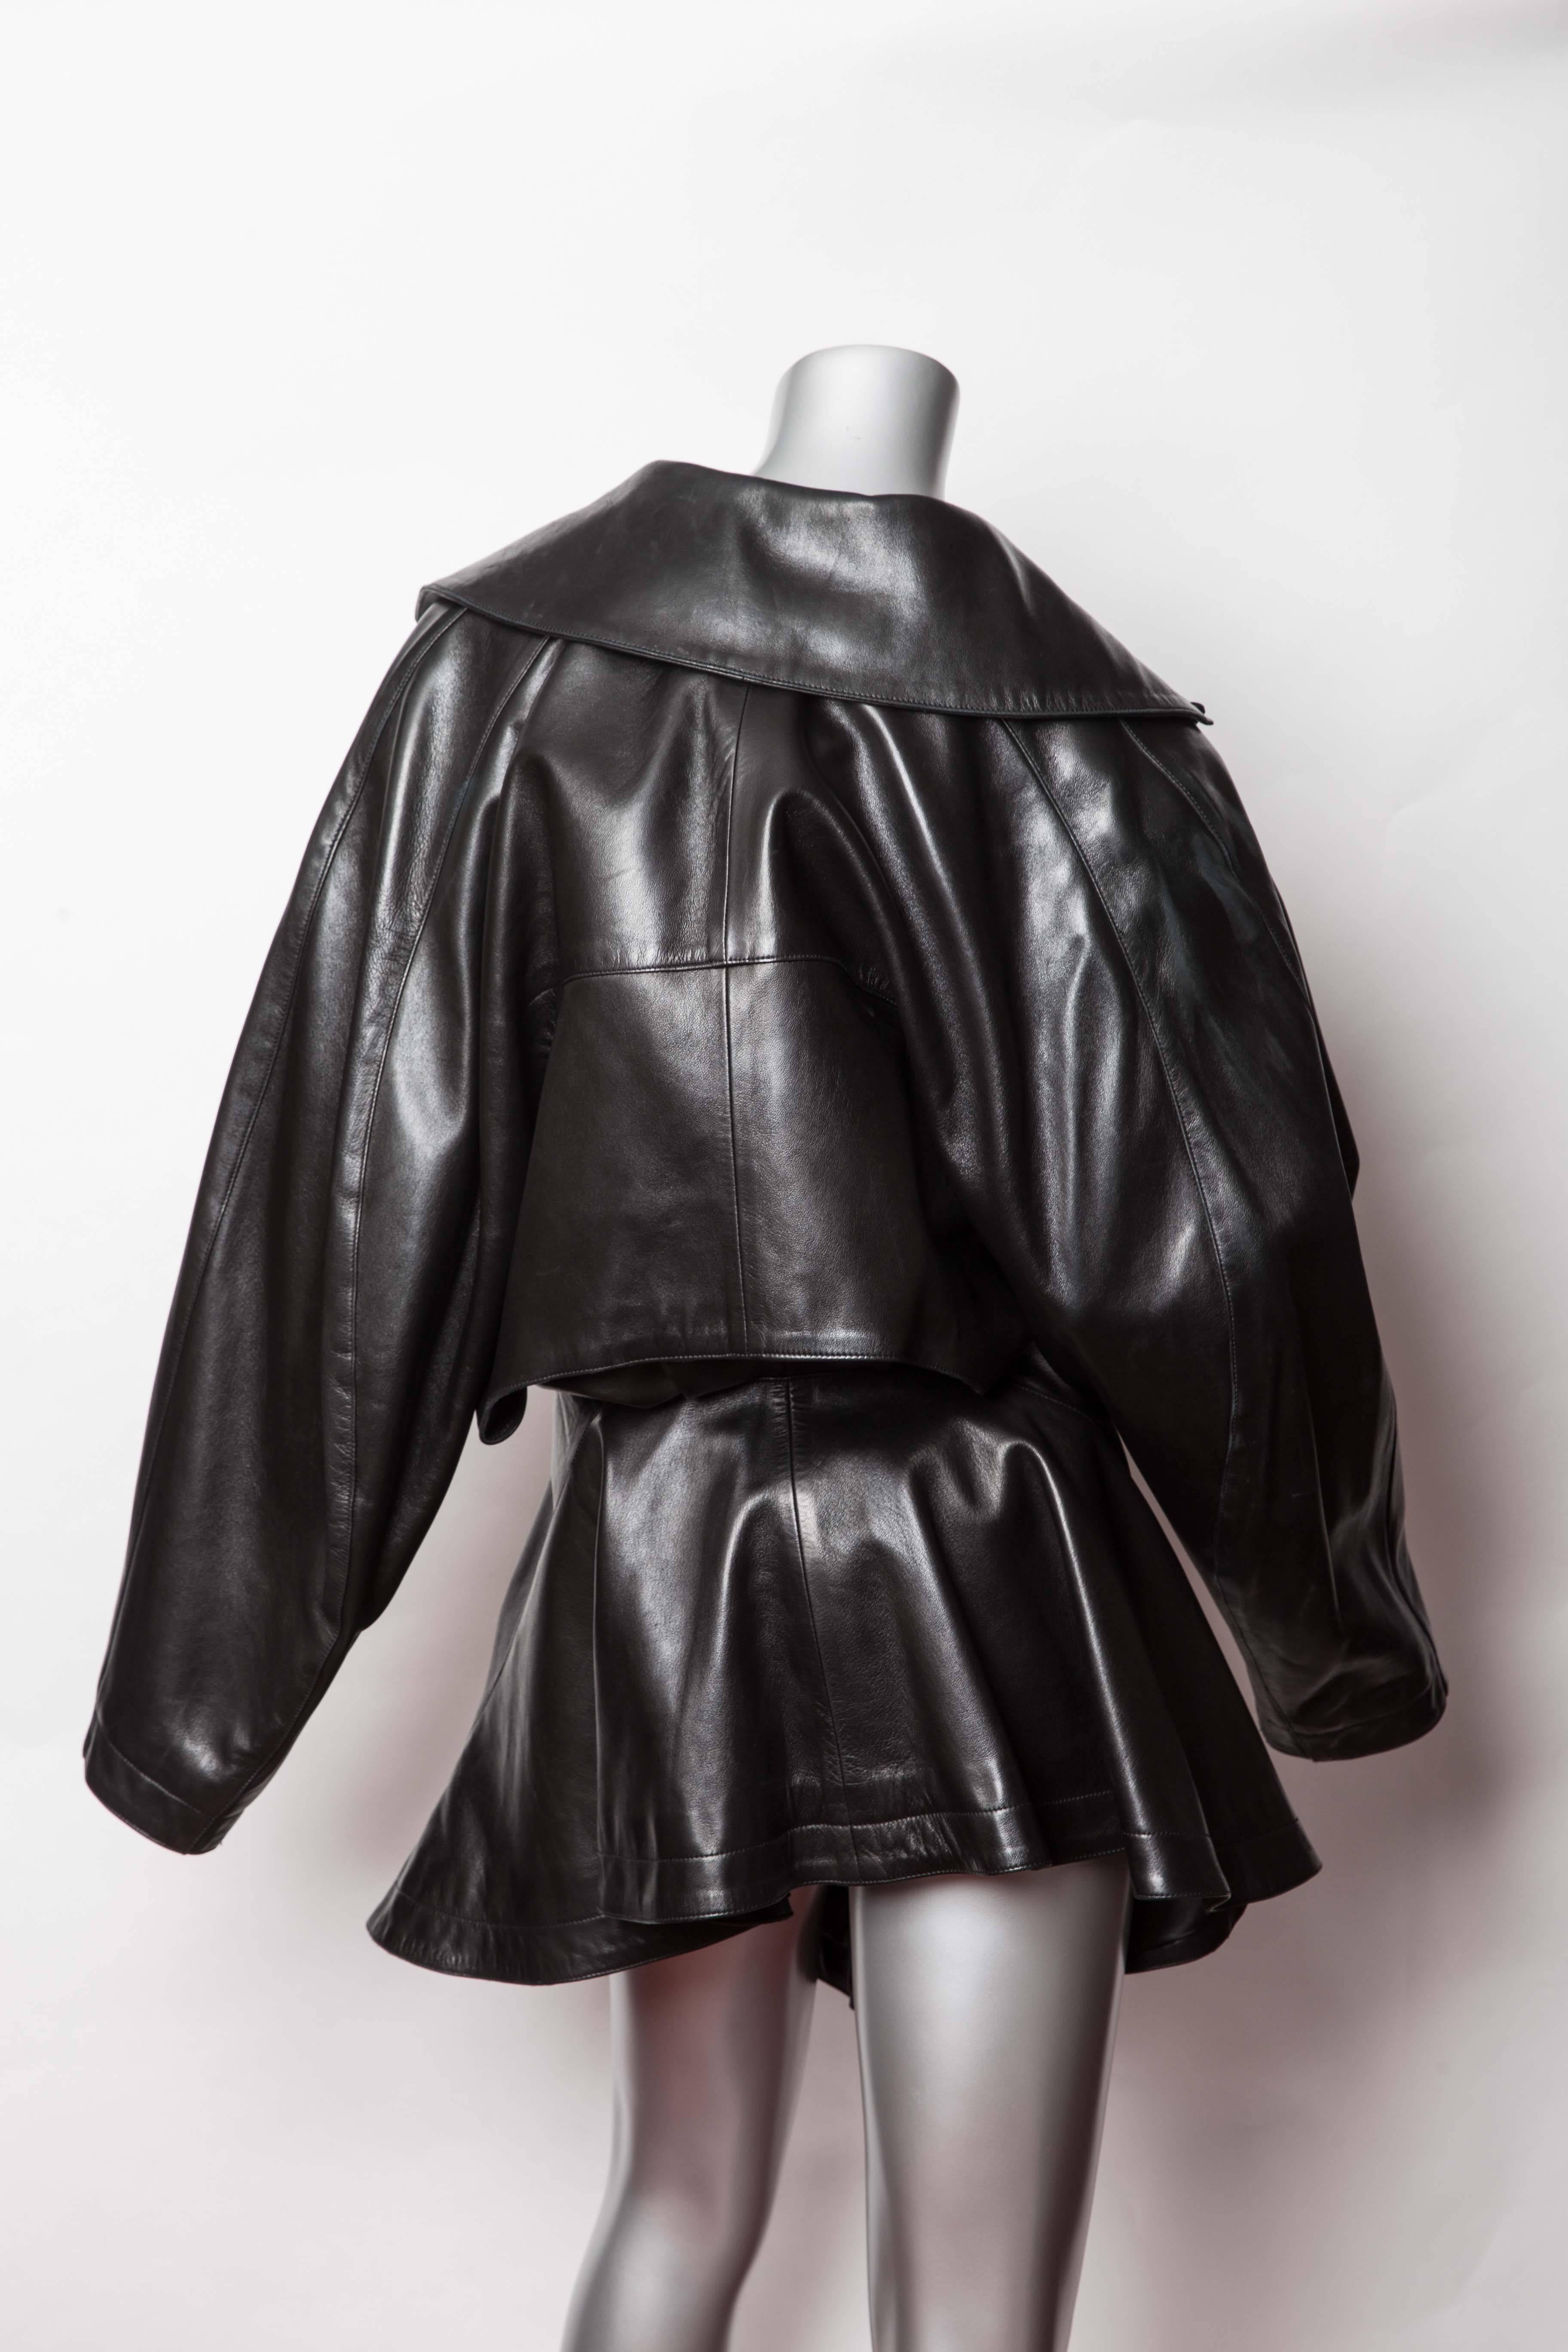 Amazing Vintage Azzedine Alaia Black Leather Jacket. This Jacket fastens at the waist with a Button. The jacket swings out from the waist and is longer in the front than the back. The back of the jacket has a cape detail. The jacket also features a